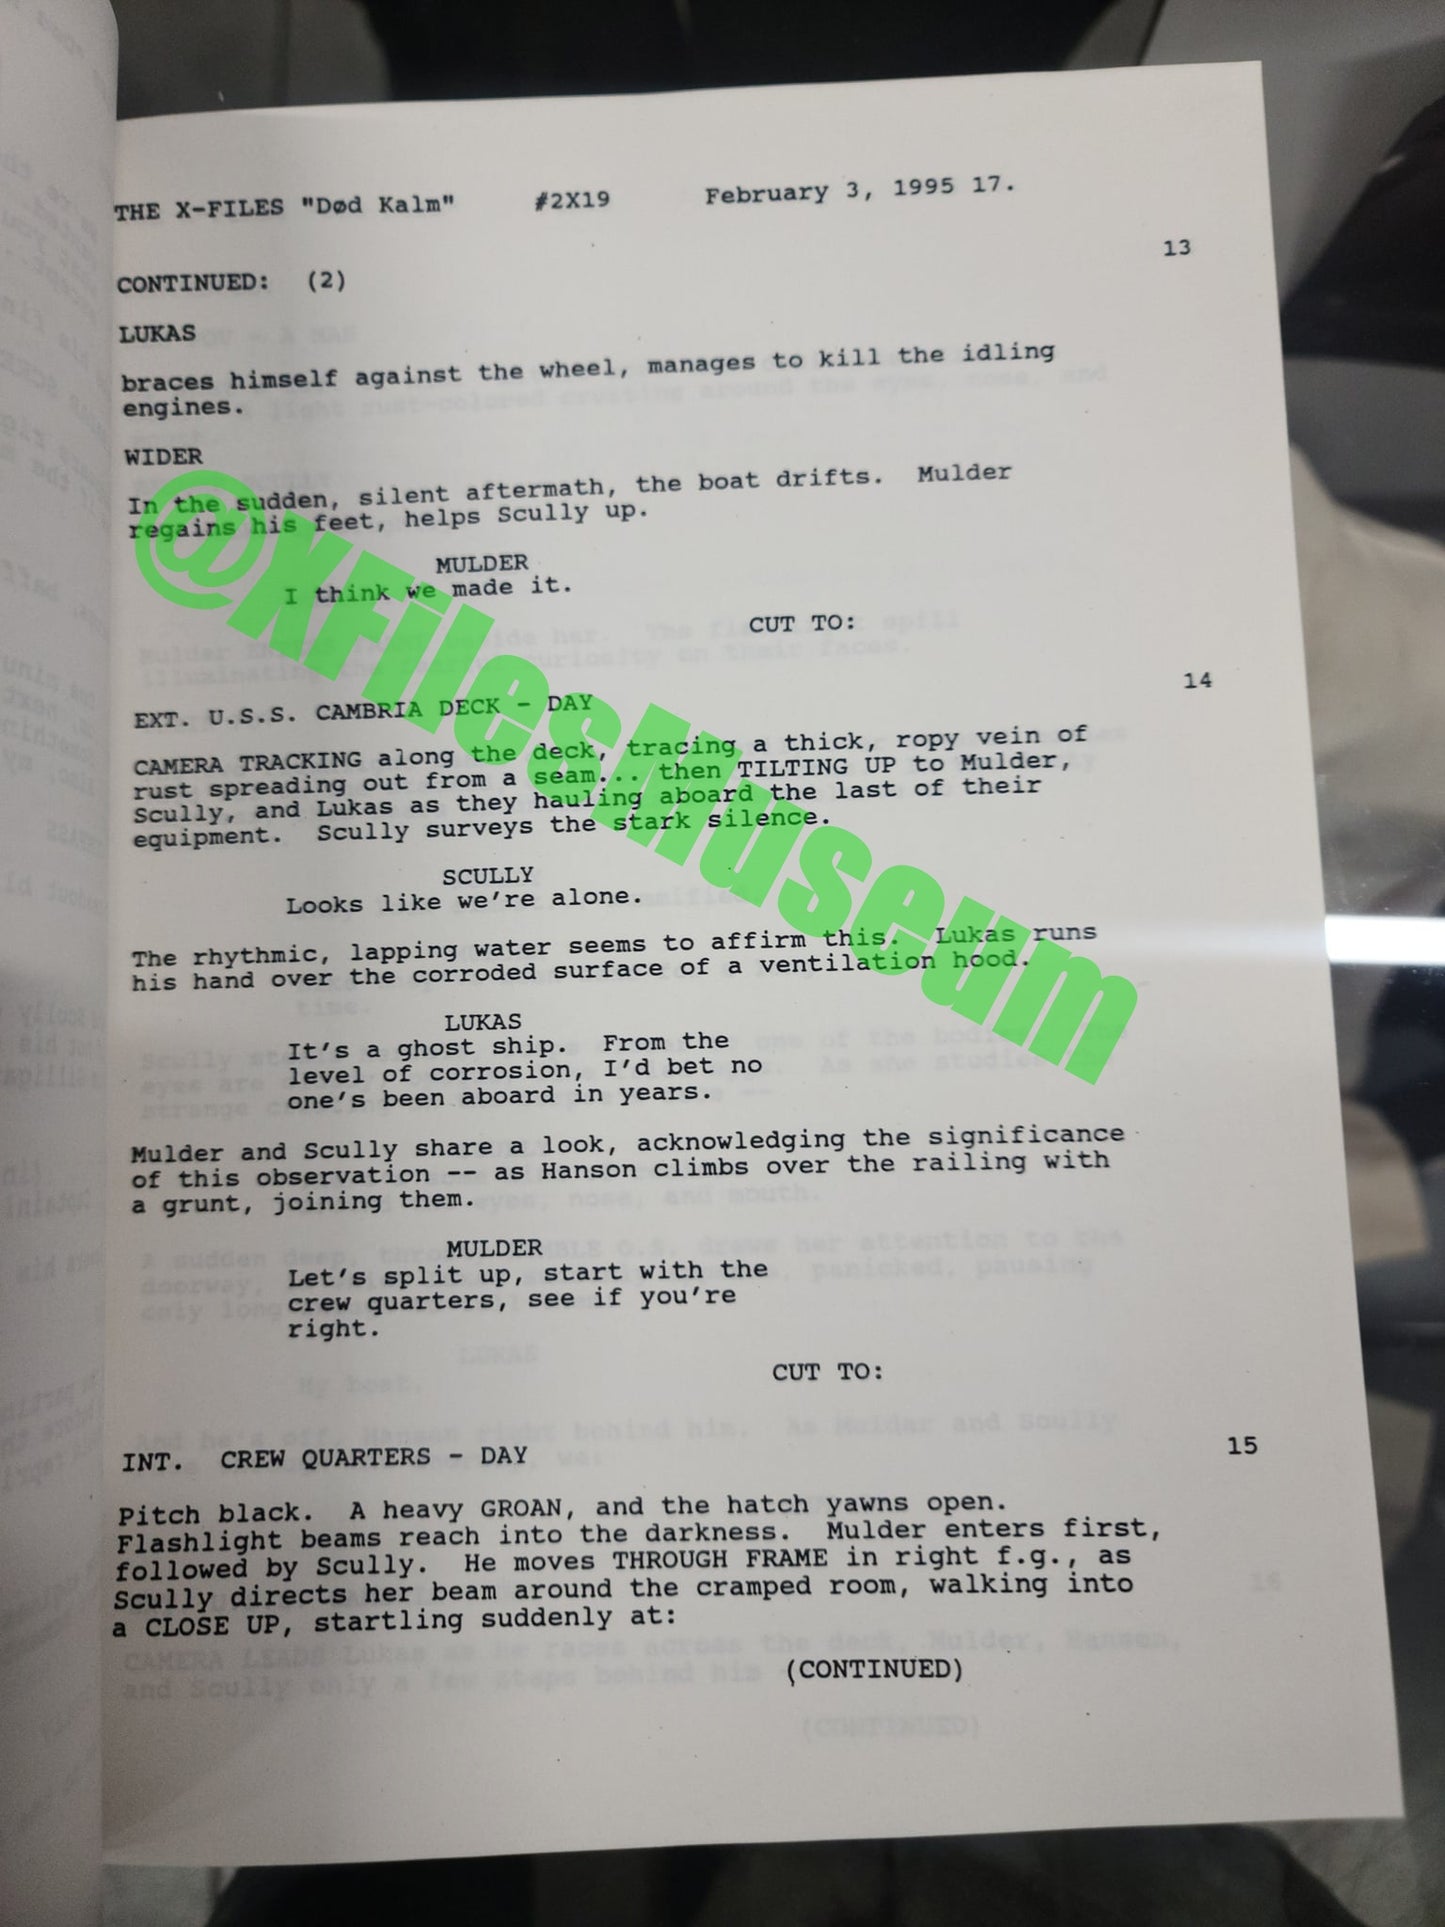 X Files Script -Episode "DOD KALM" - Not Production Used